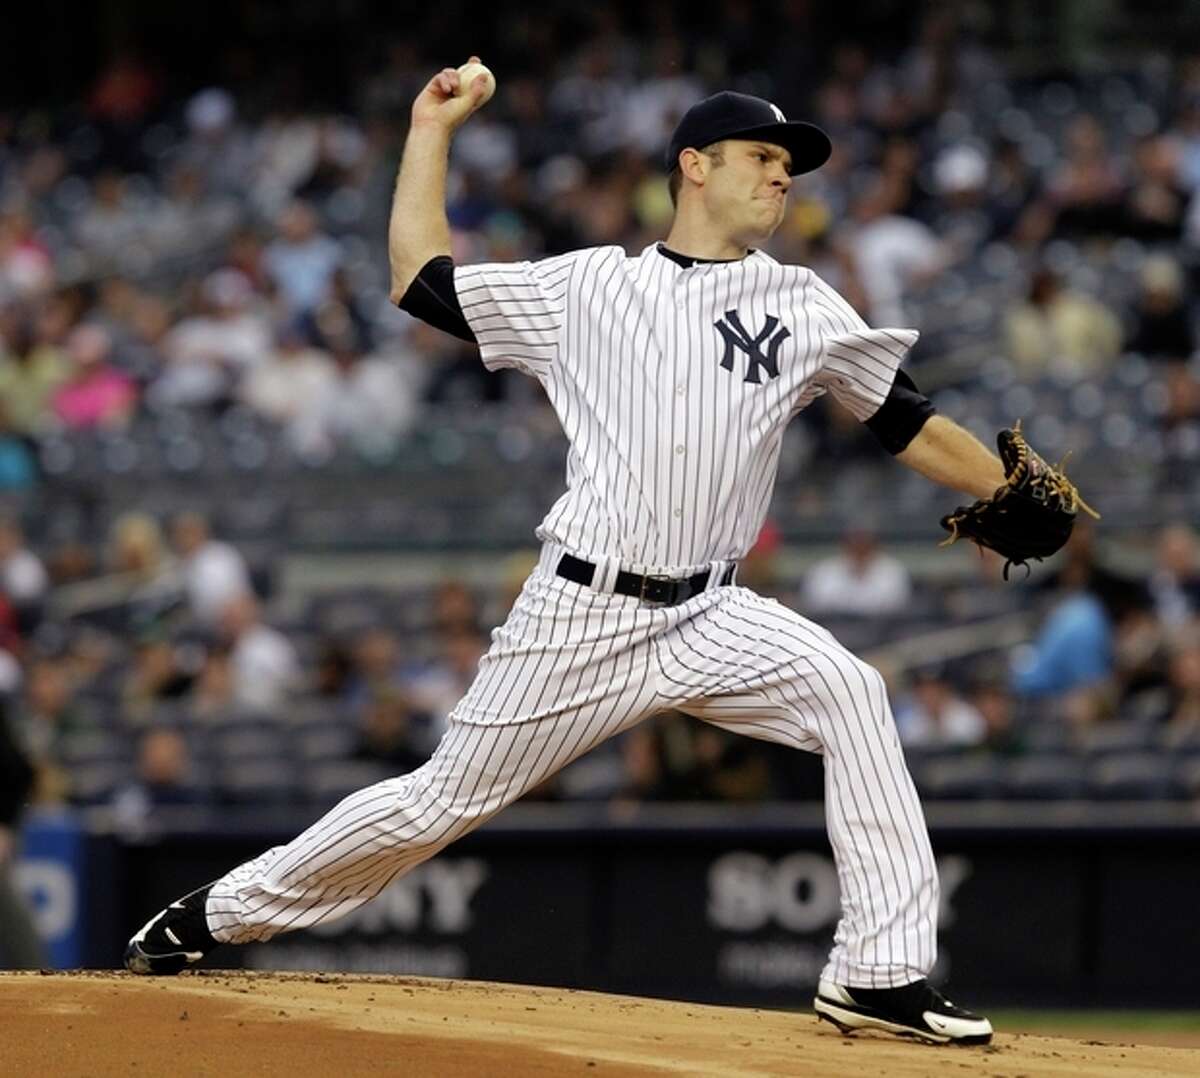 New York Yankees starting pitcher David Phelps delivers against the Tampa Bay Rays in the second inning during their baseball game at Yankee Stadium in New York, Wednesday, May 9, 2012. (AP Photo/Kathy Willens)